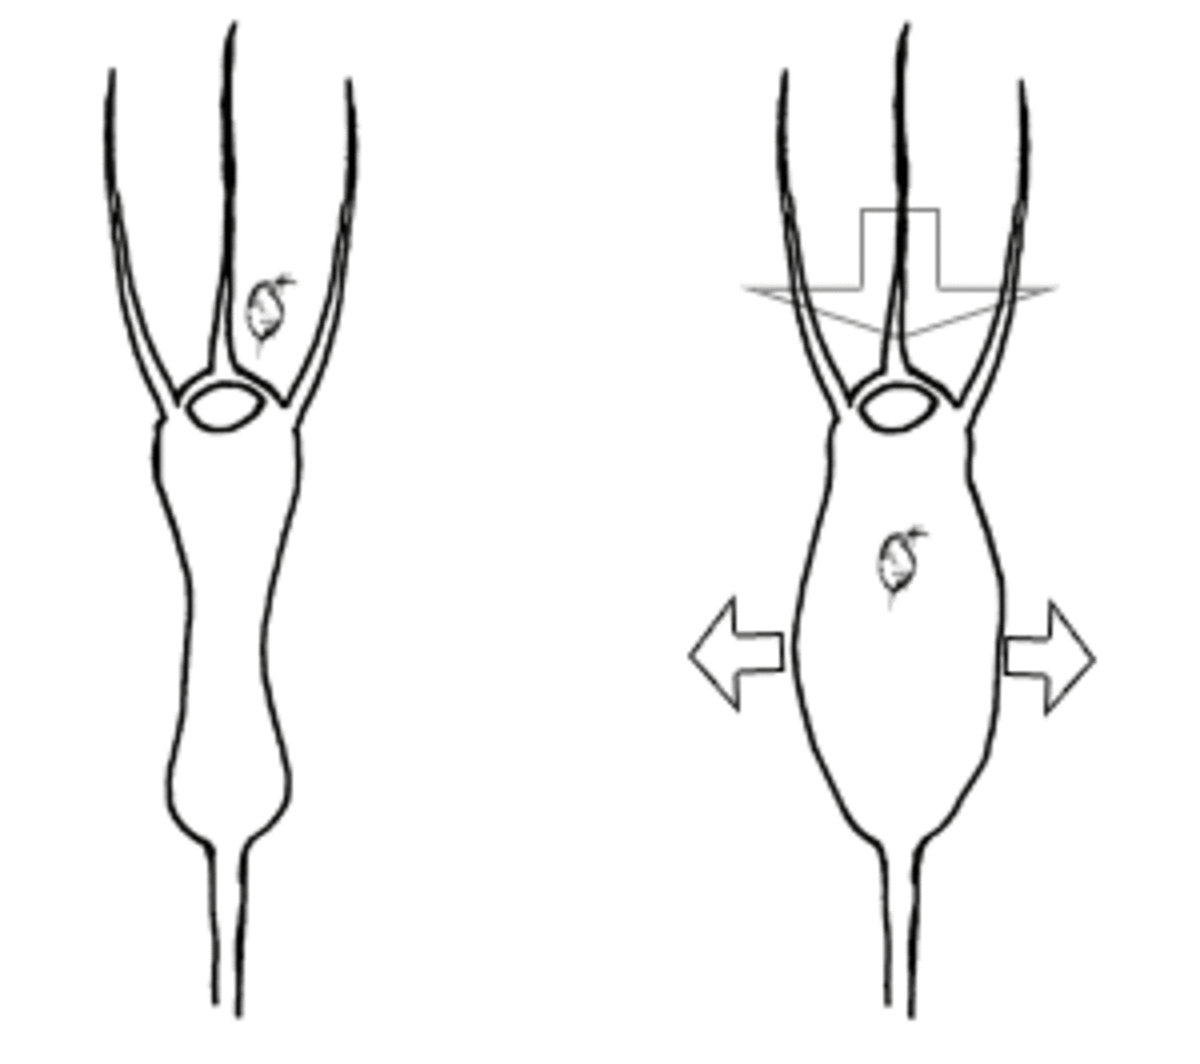 Bladder expansion and trapping mechanism.